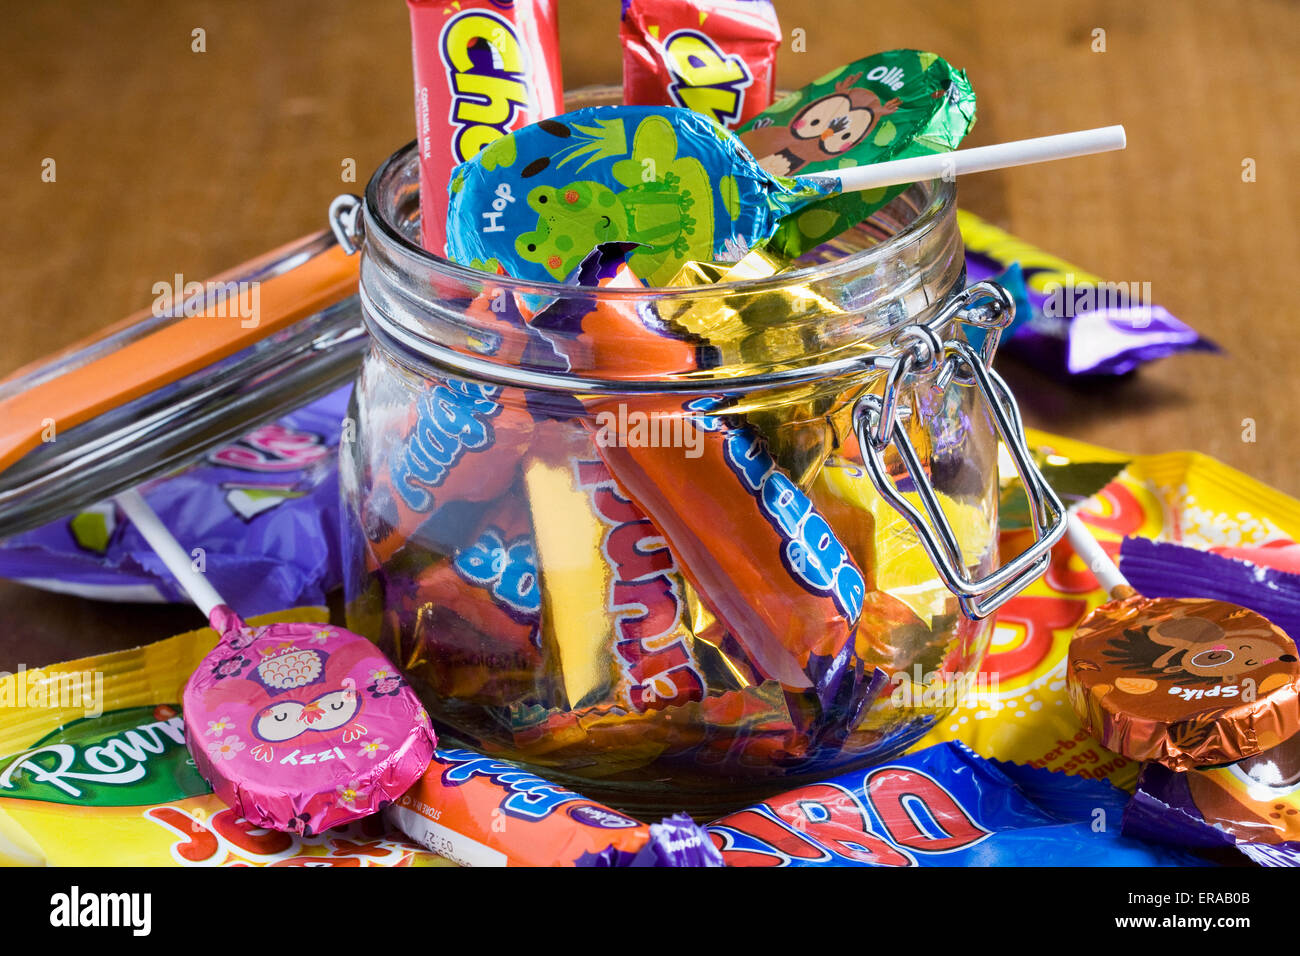 Children's candy in a glass jar. Stock Photo